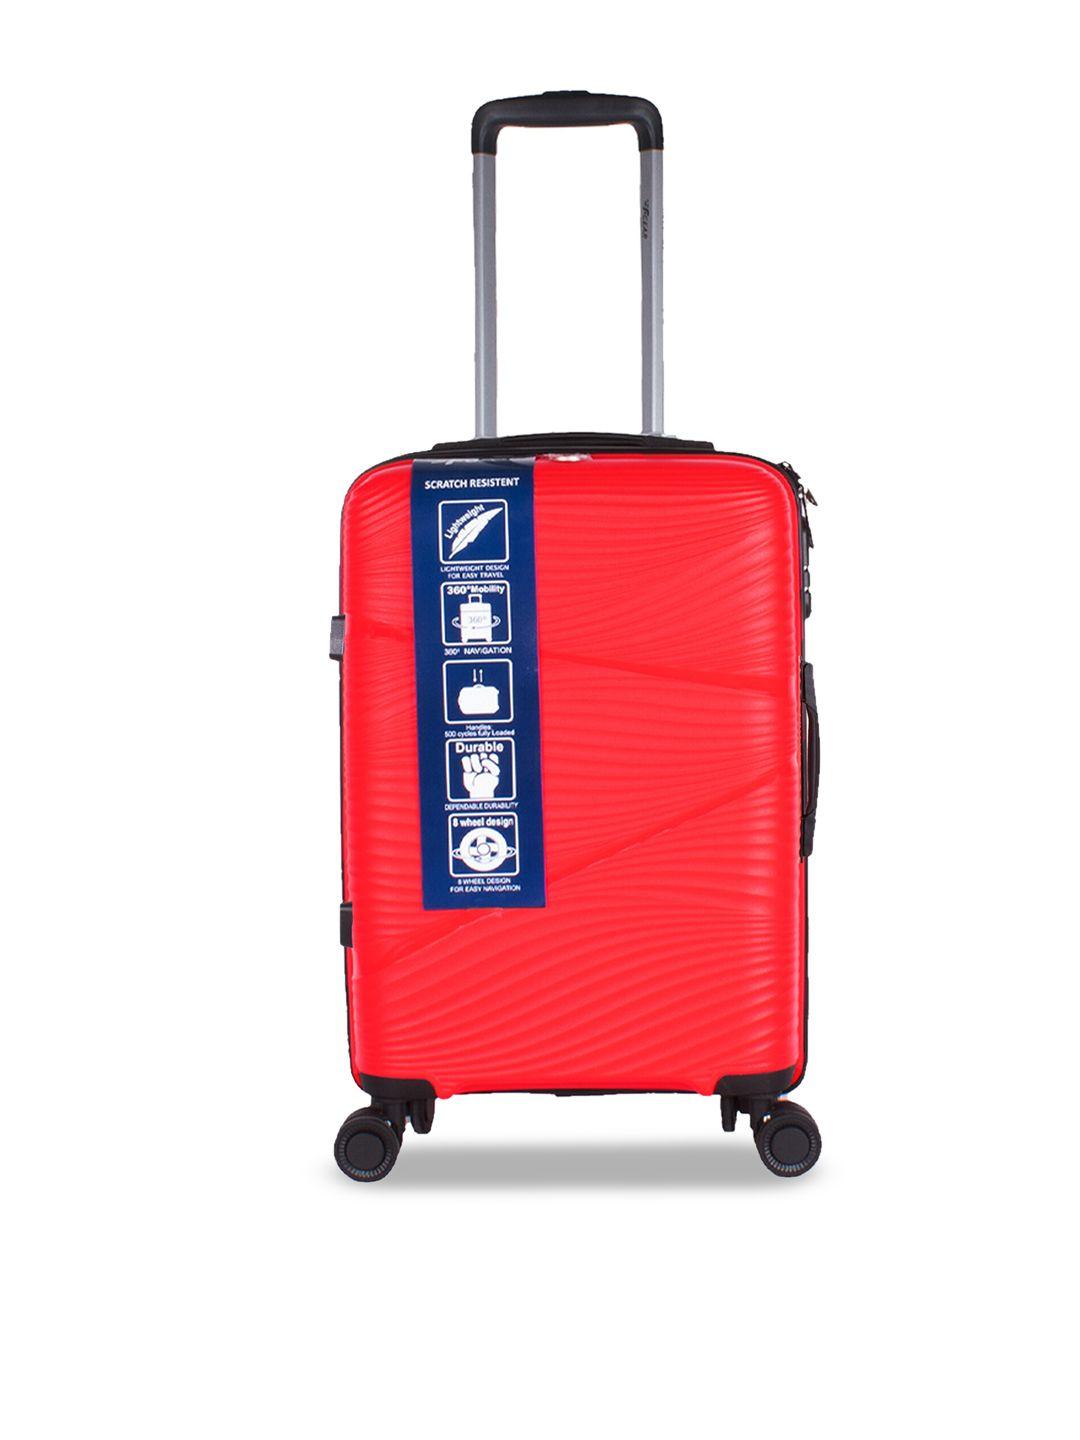 f gear textured joy pp008 28" 360 large trolley suitcase